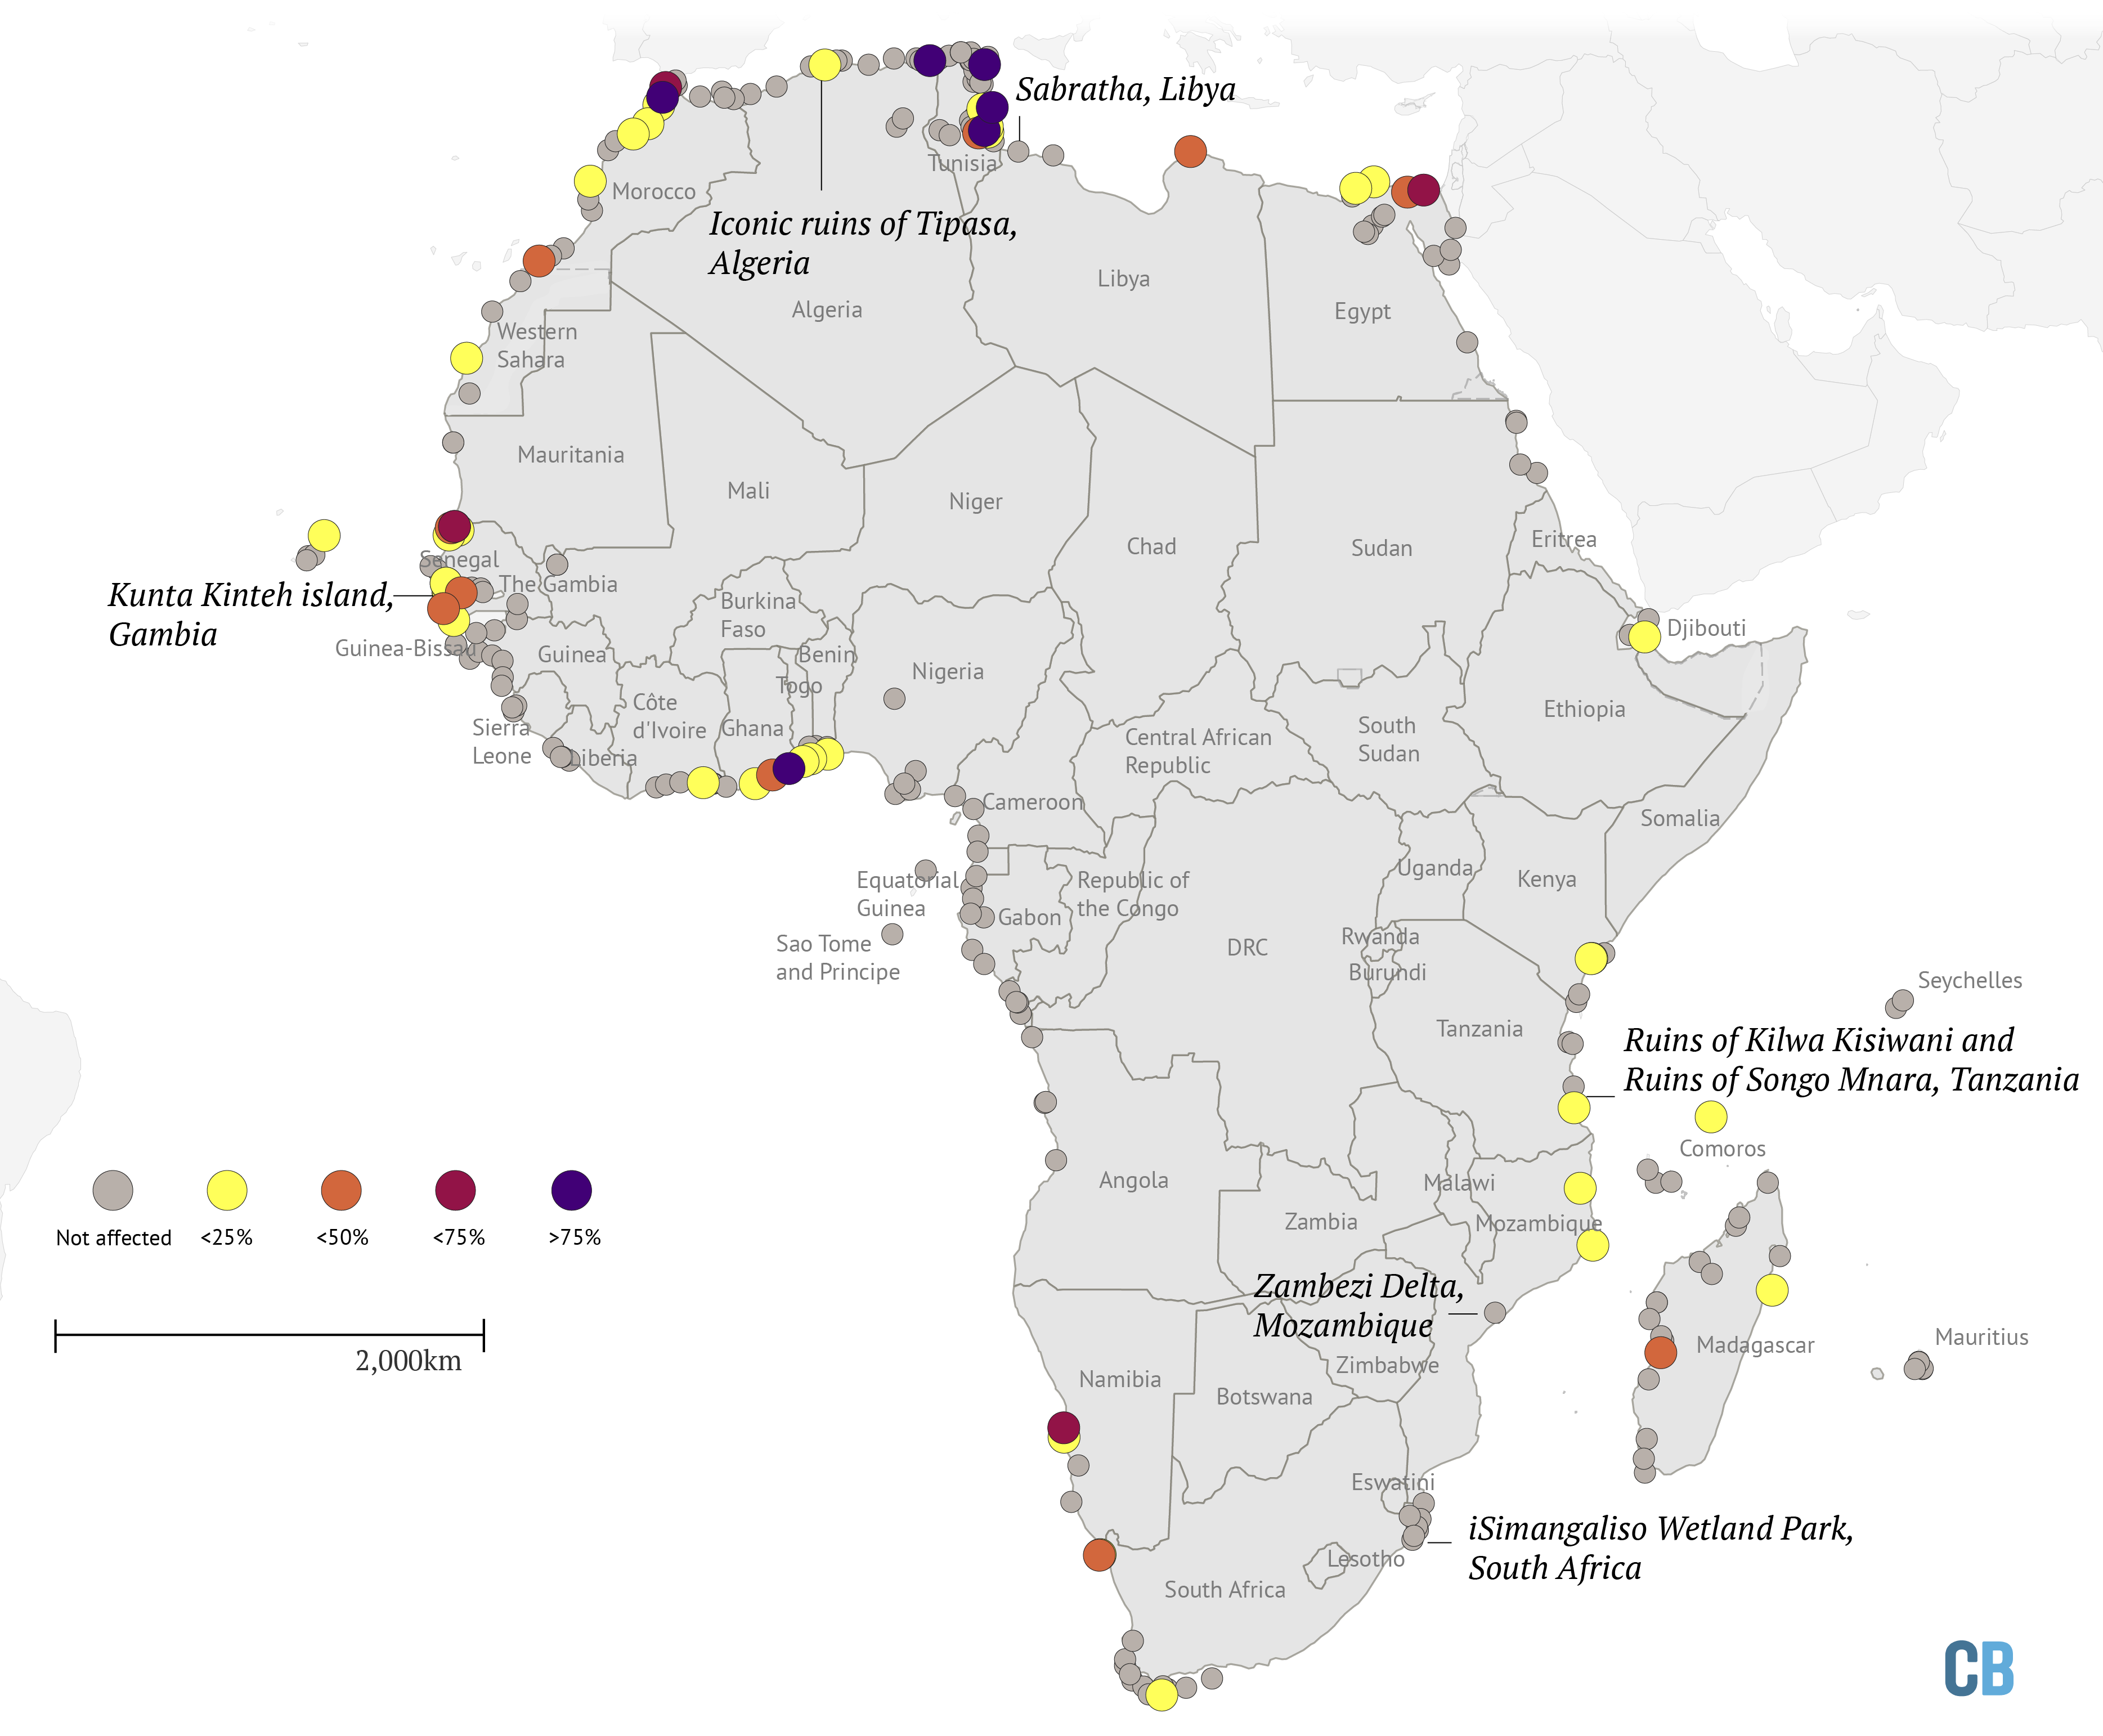 We analysed climate research on Africa. Here's what we found